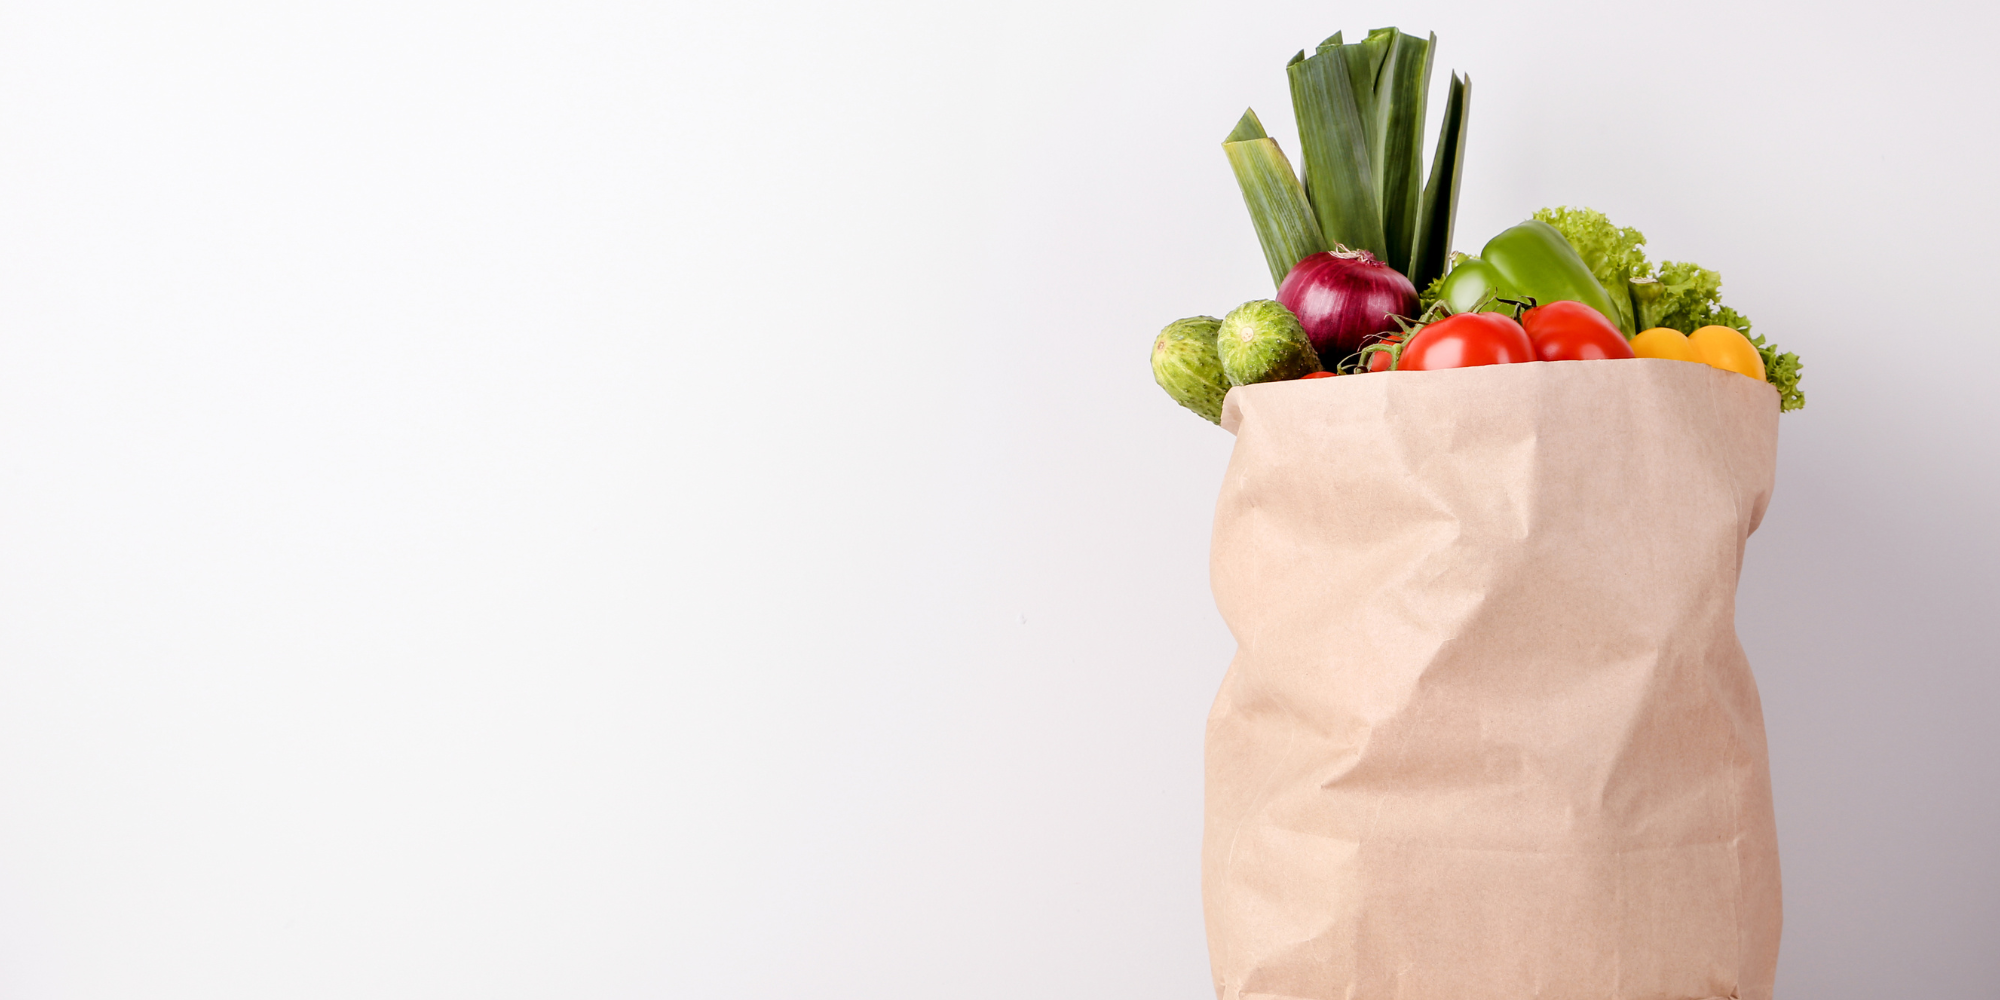 Brown paper grocery bag full of colorful vegetables